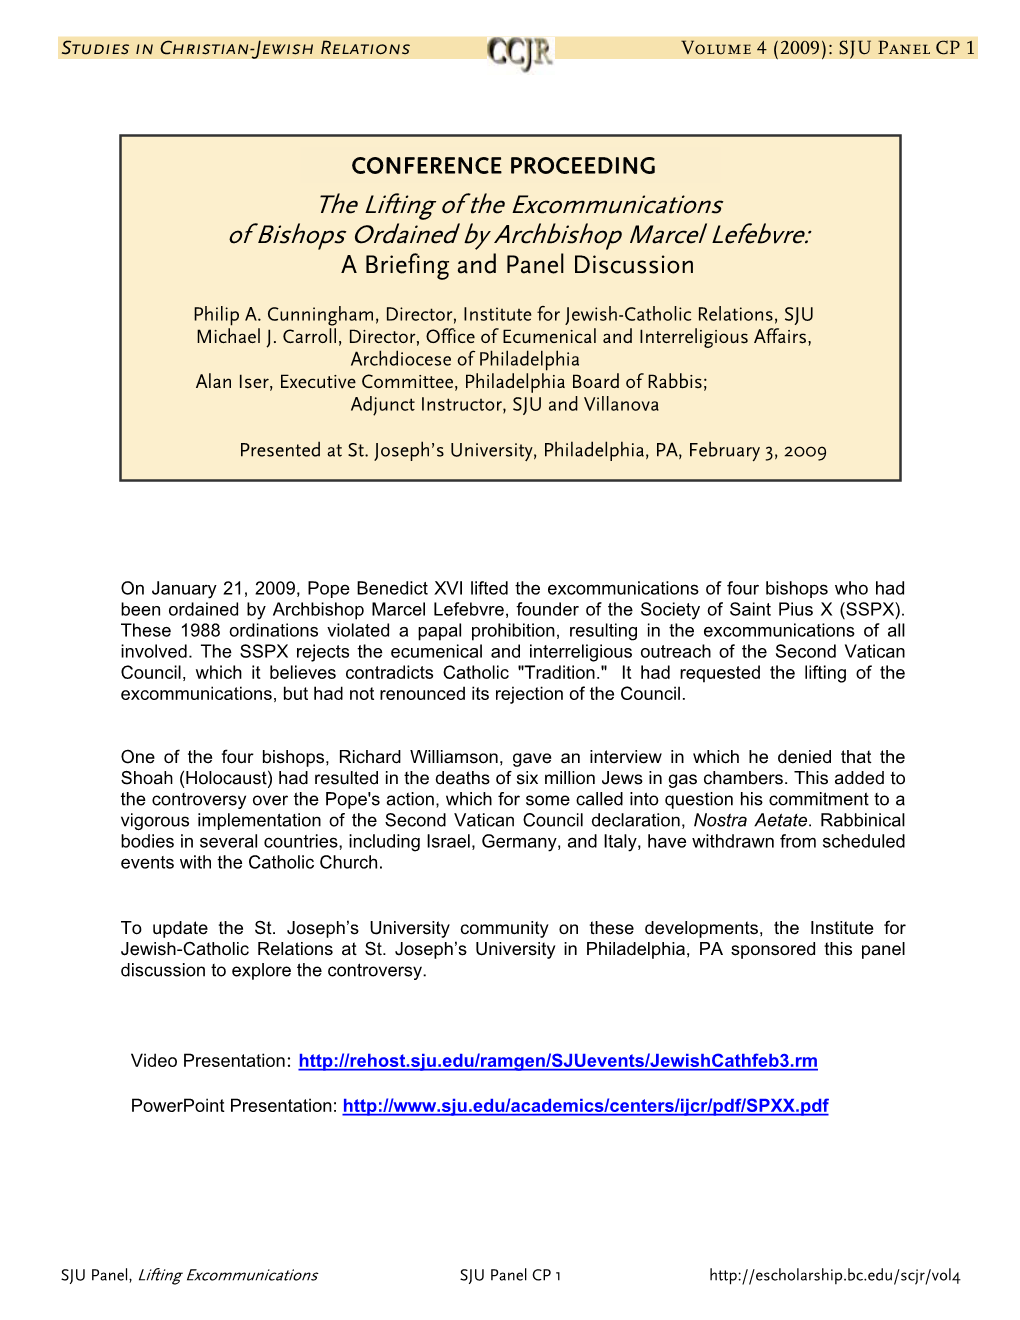 The Lifting of the Excommunications of Bishops Ordained by Archbishop Marcel Lefebvre: a Briefing and Panel Discussion